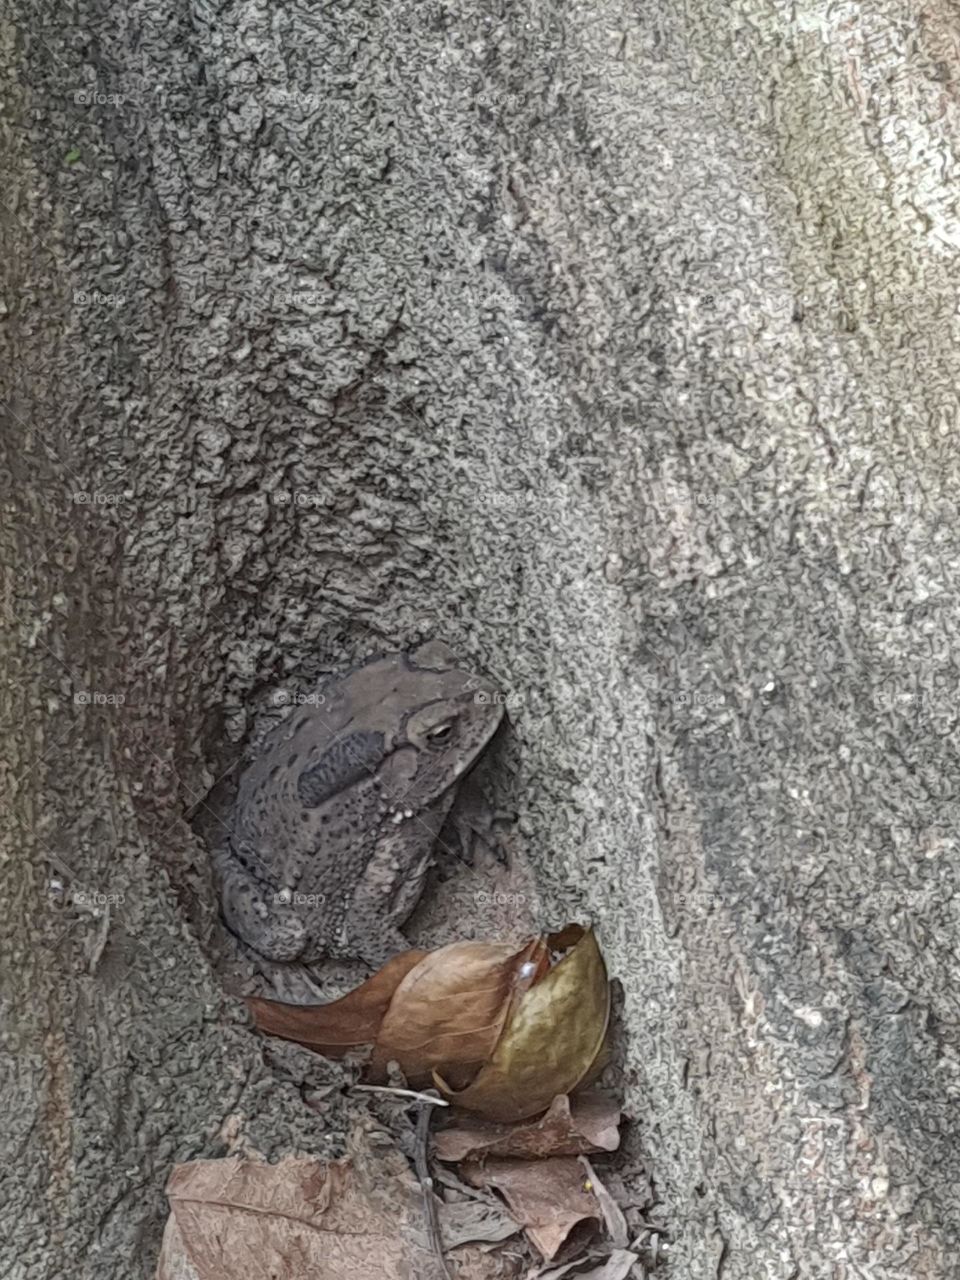 Hiding frog in the root of tree